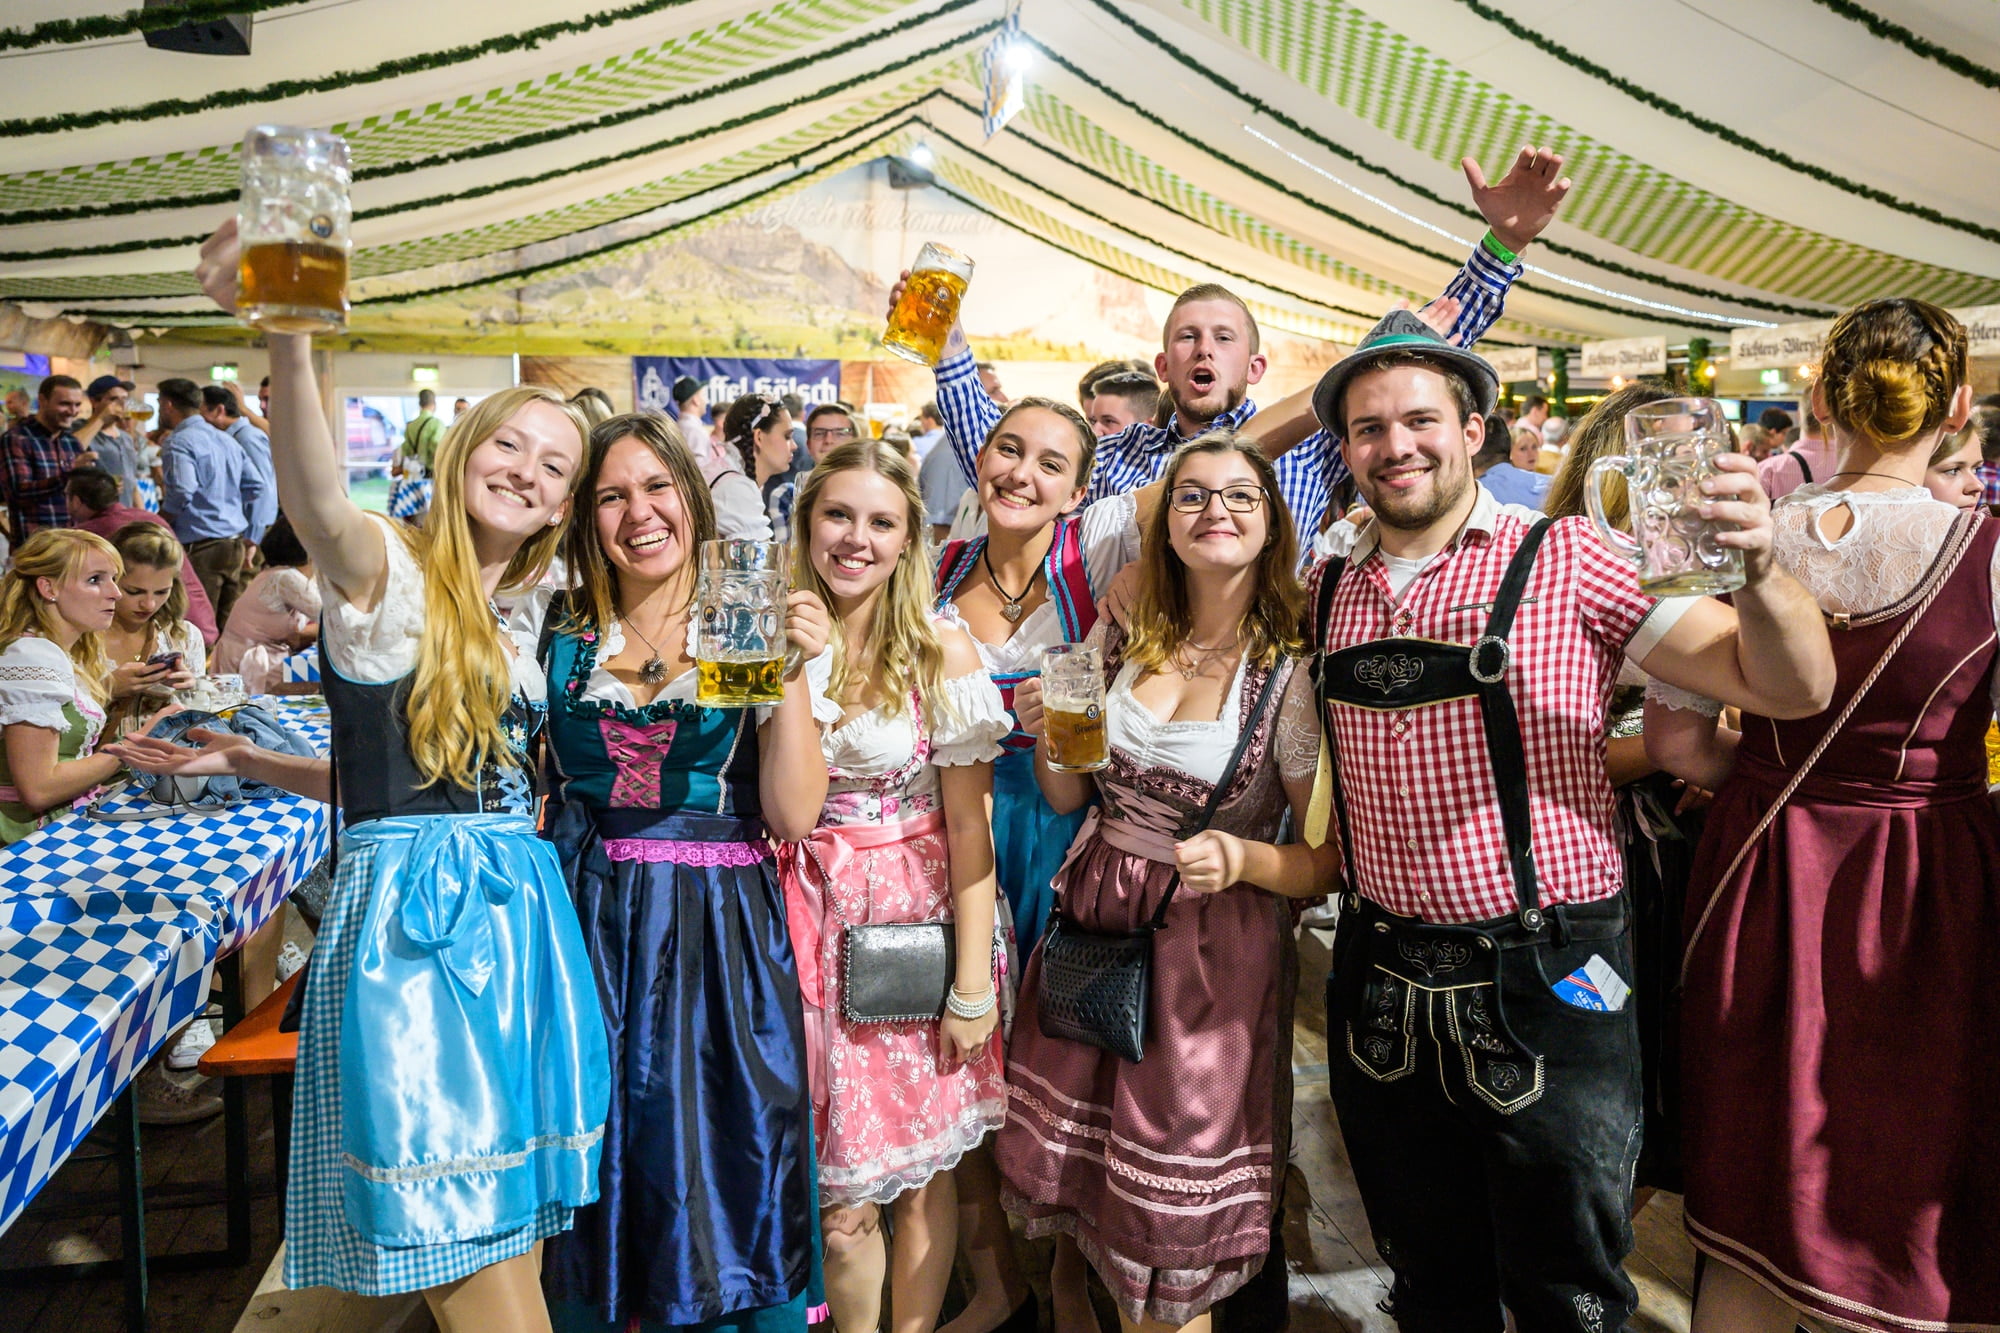 Oktoberfest during a concert Typical beer tent scene.